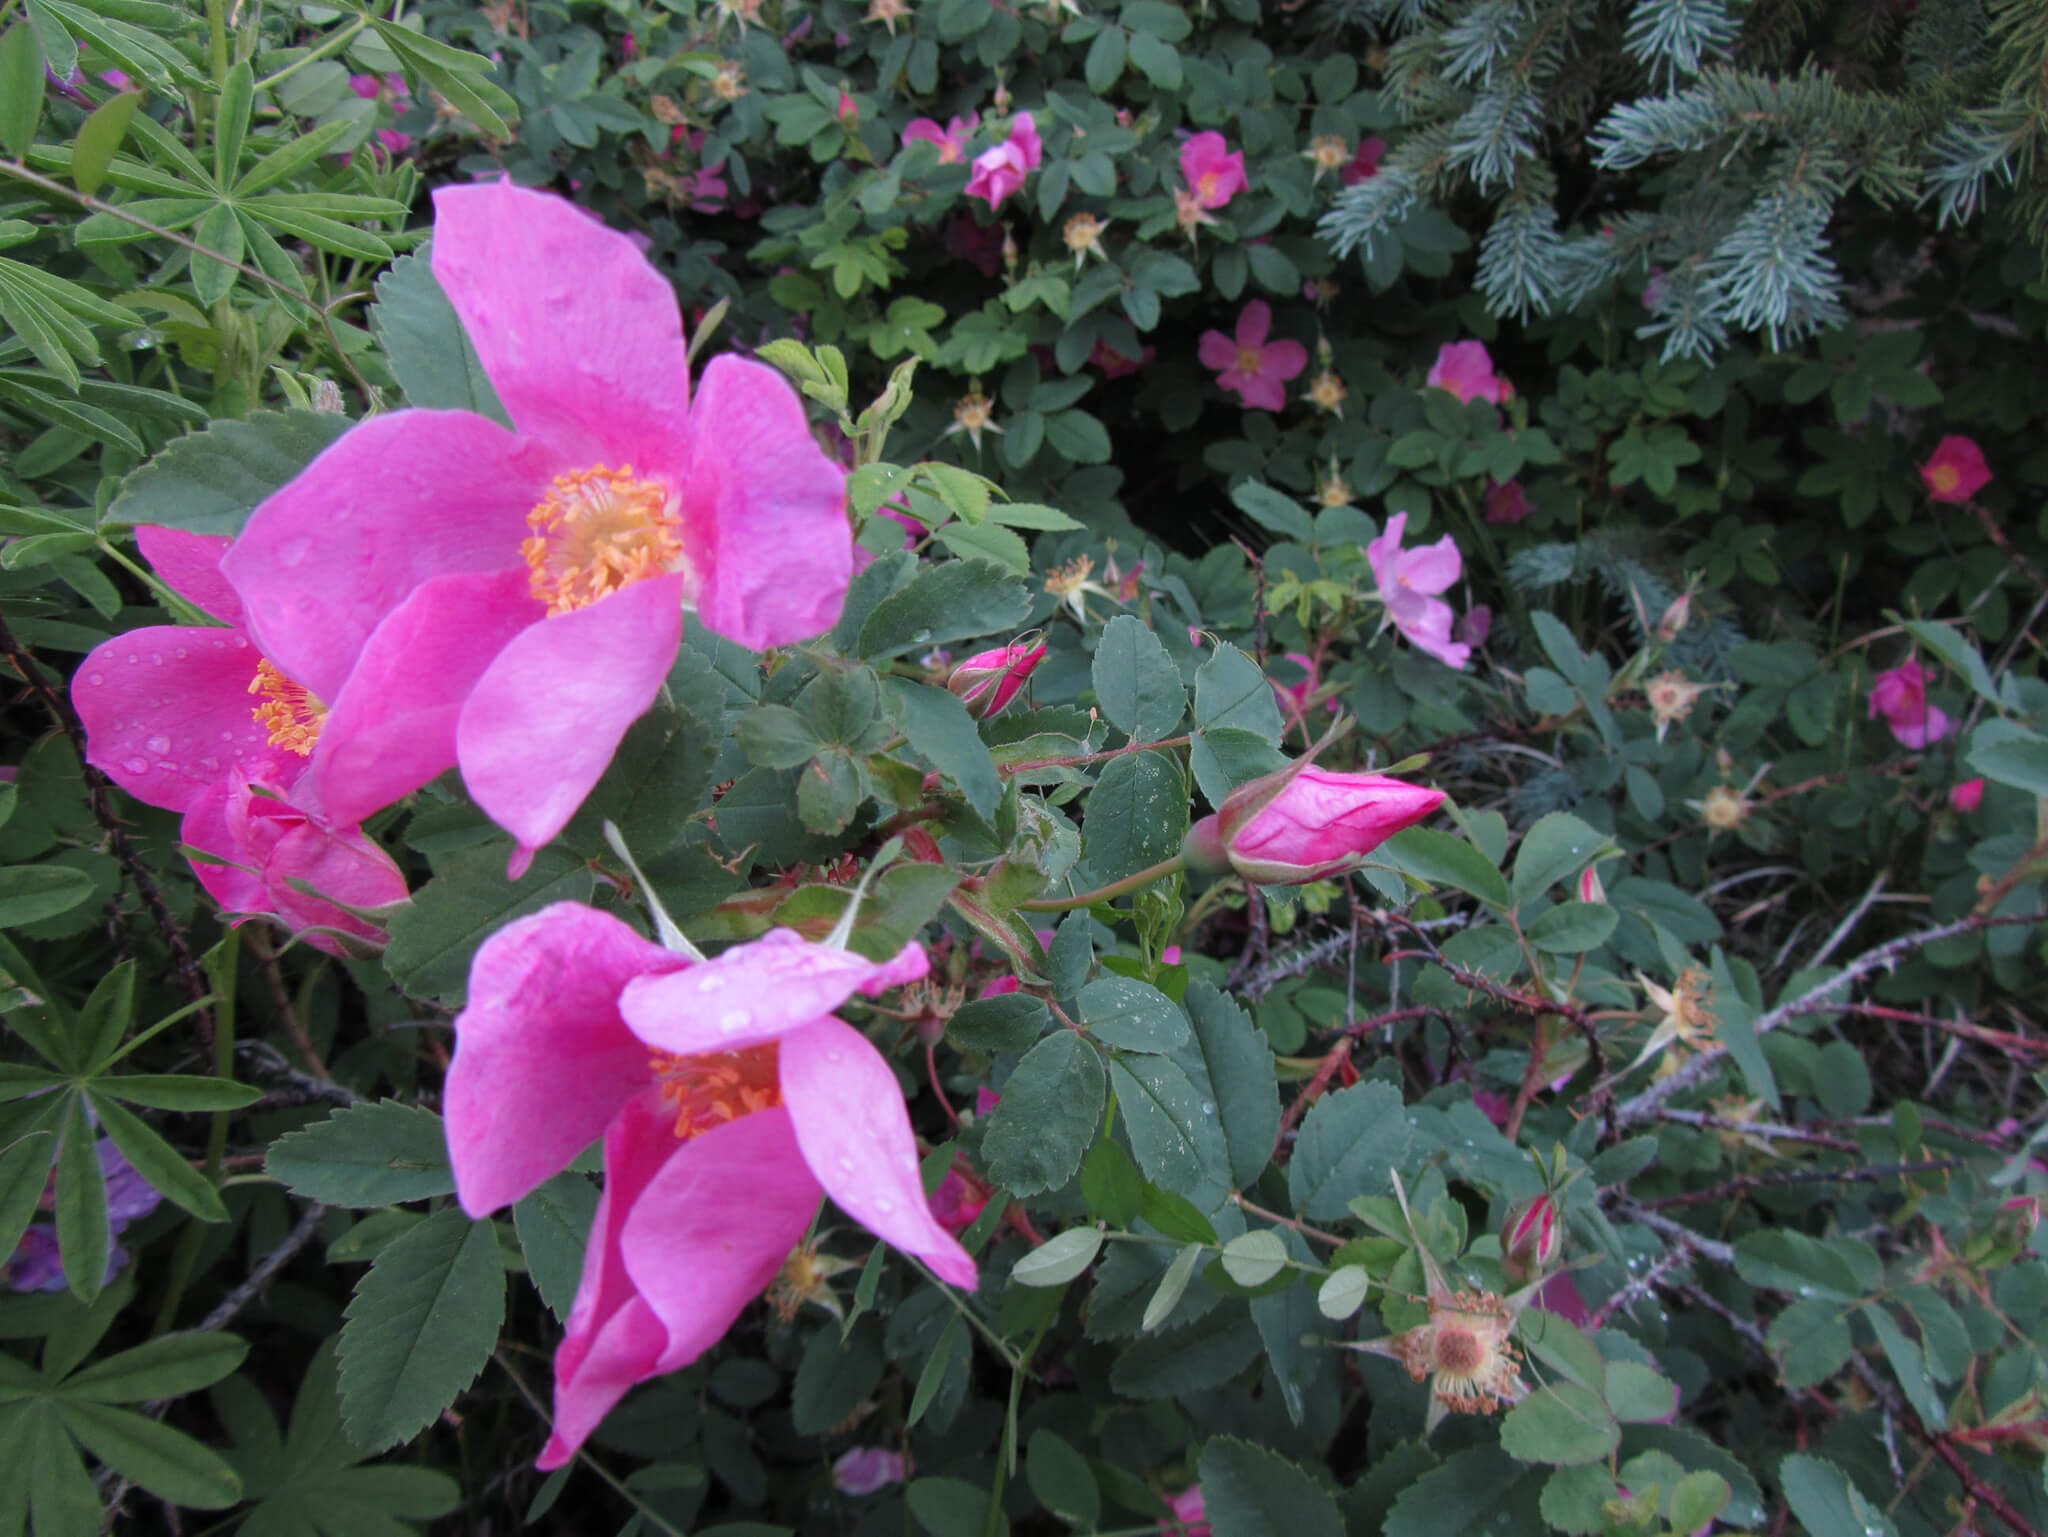 Wild Rose: How you’d expect a rose to smell.